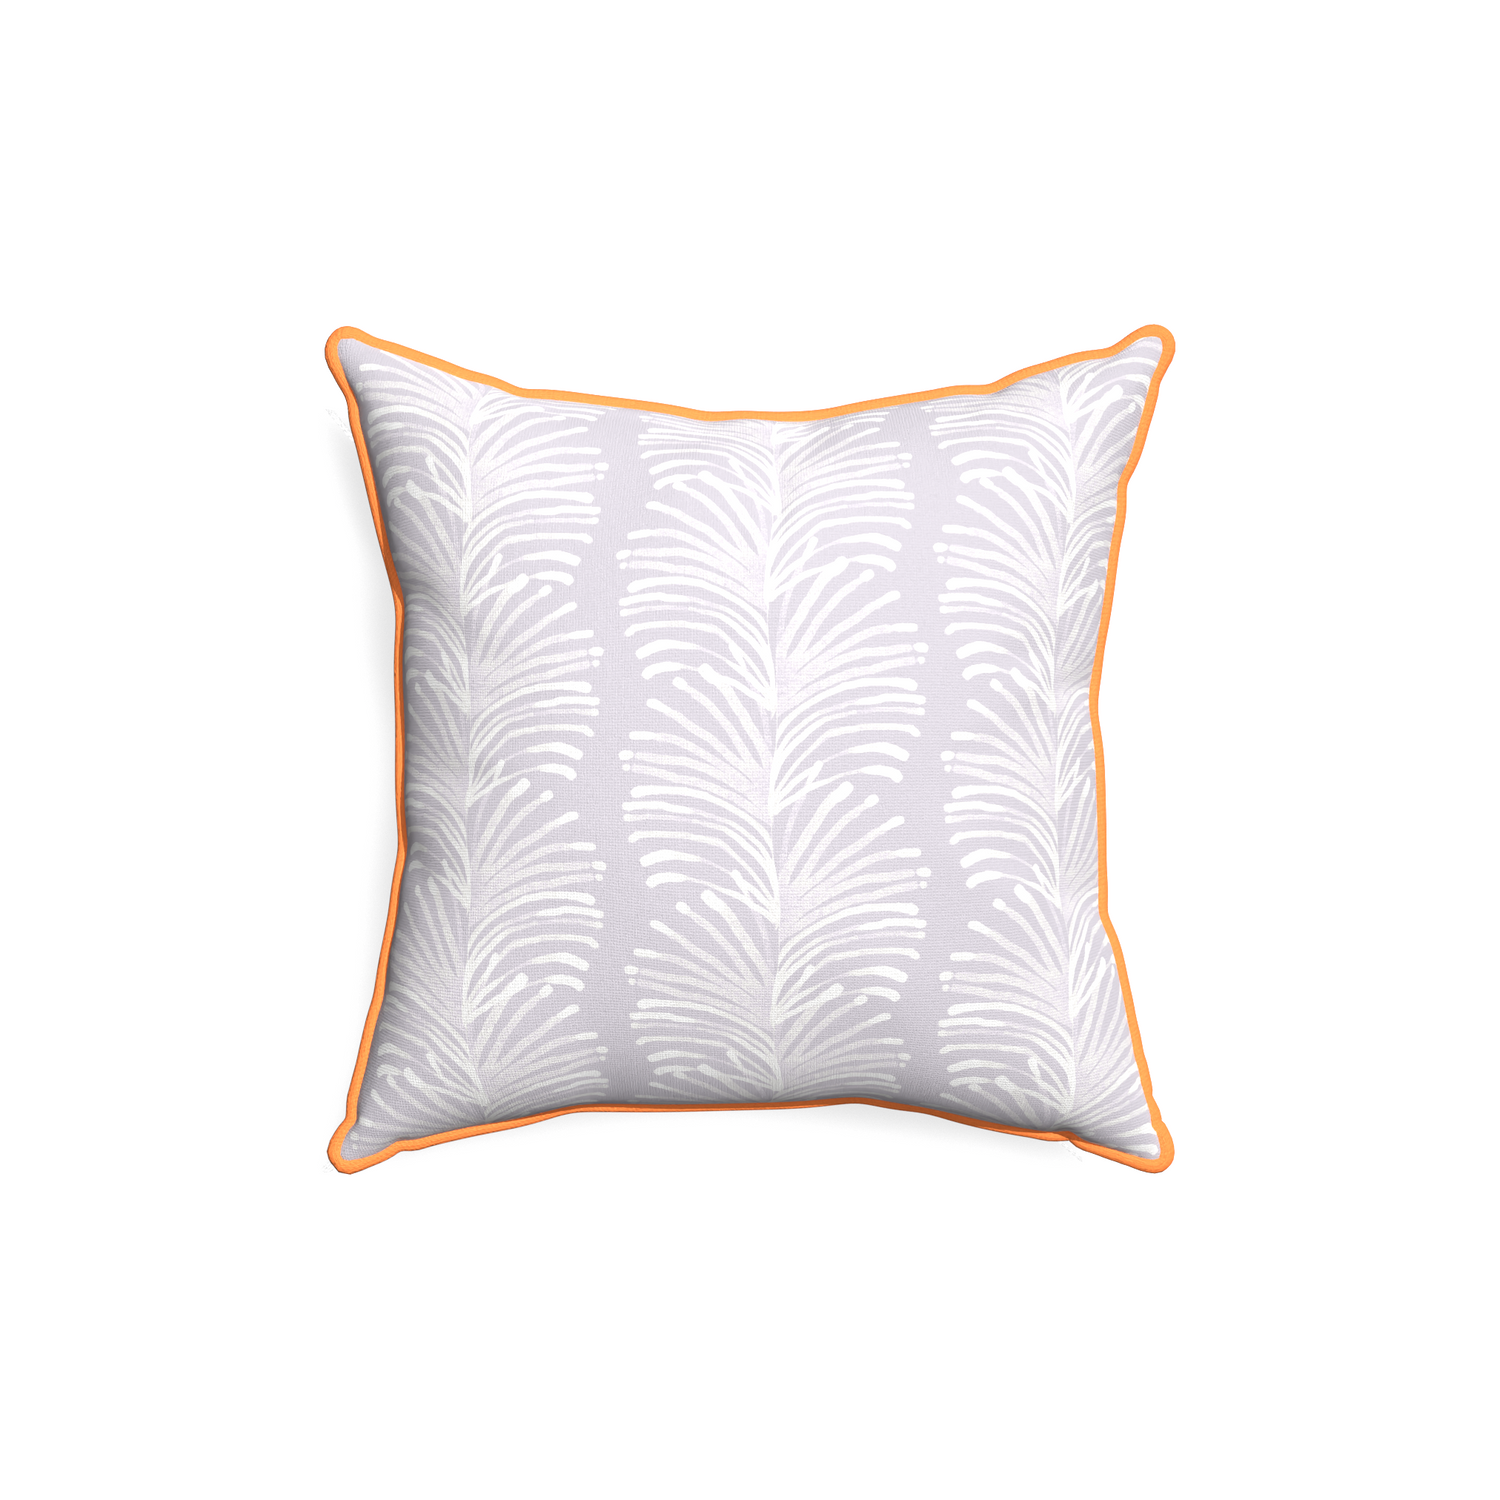 18-square emma lavender custom lavender botanical stripepillow with clementine piping on white background